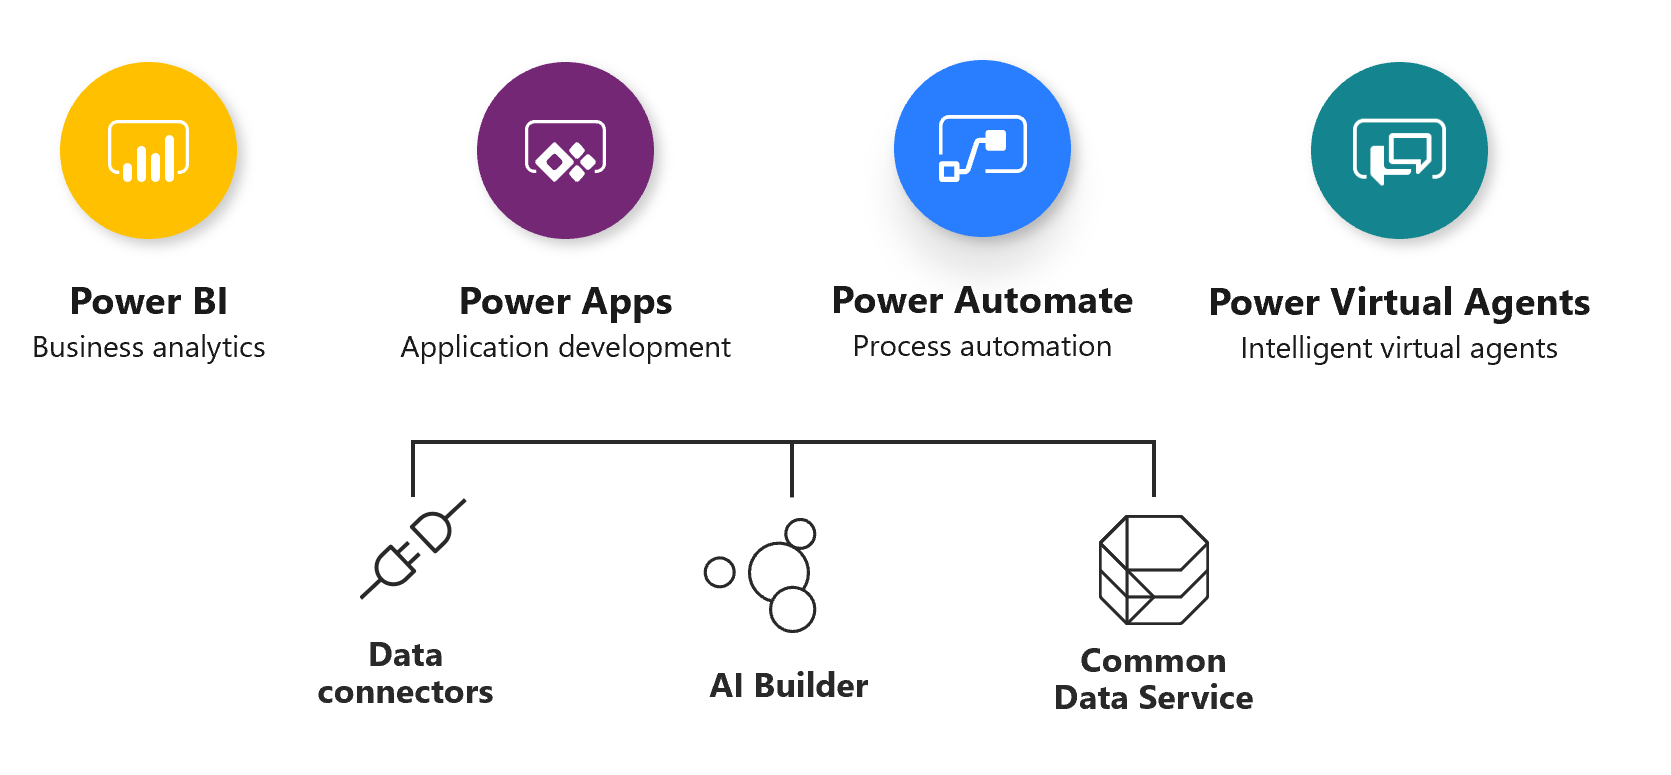 Graphic showing that Power BI, Power Apps, Power Automate, and Power Virtual Agents are supported by data connectors, AI Builder, and Microsoft Dataverse